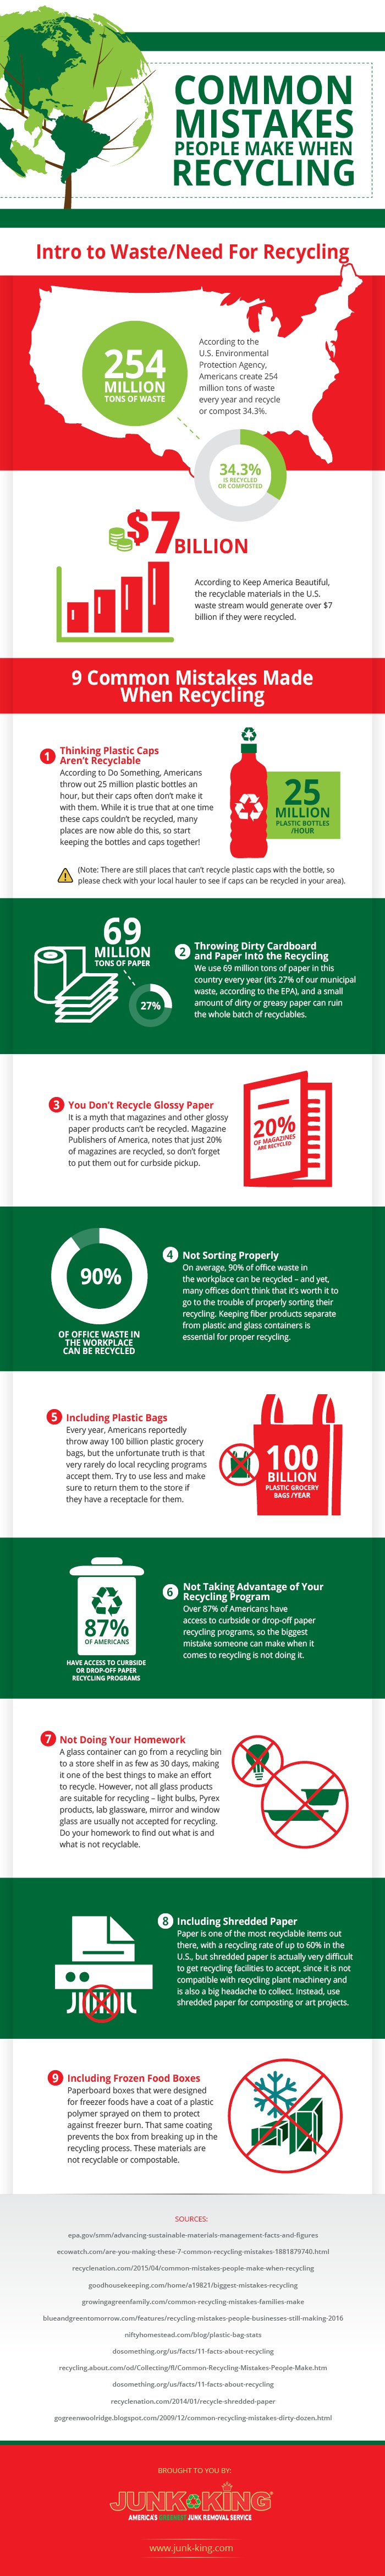 Common_Mistakes_People_Make_When_Recycling_Infographic.jpg